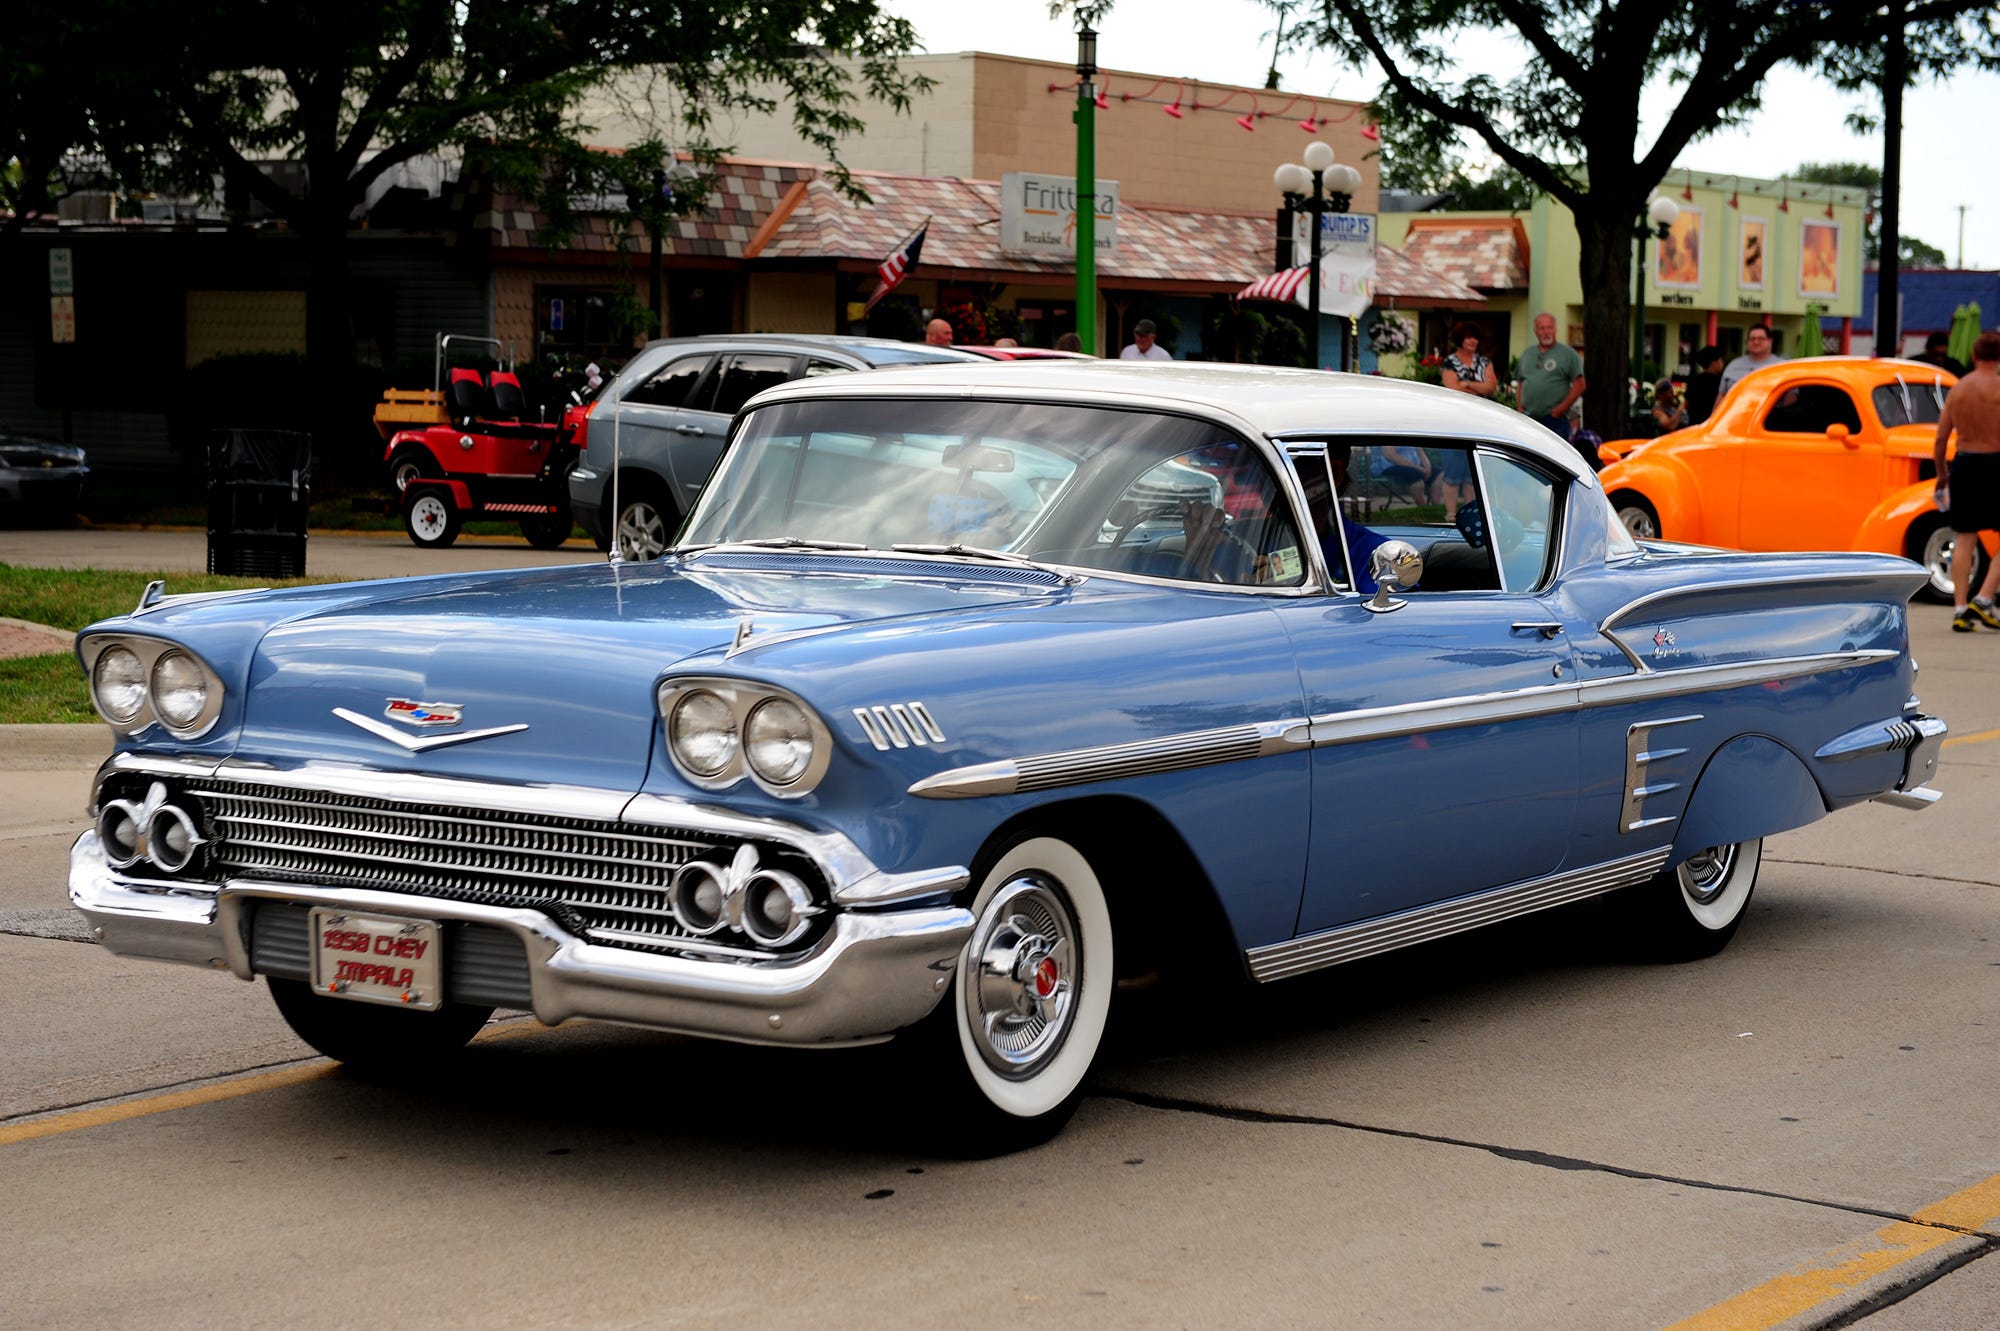 A 1958 Chevy Impala cruises down Woodward in Clawson on Aug. 10, 2013.